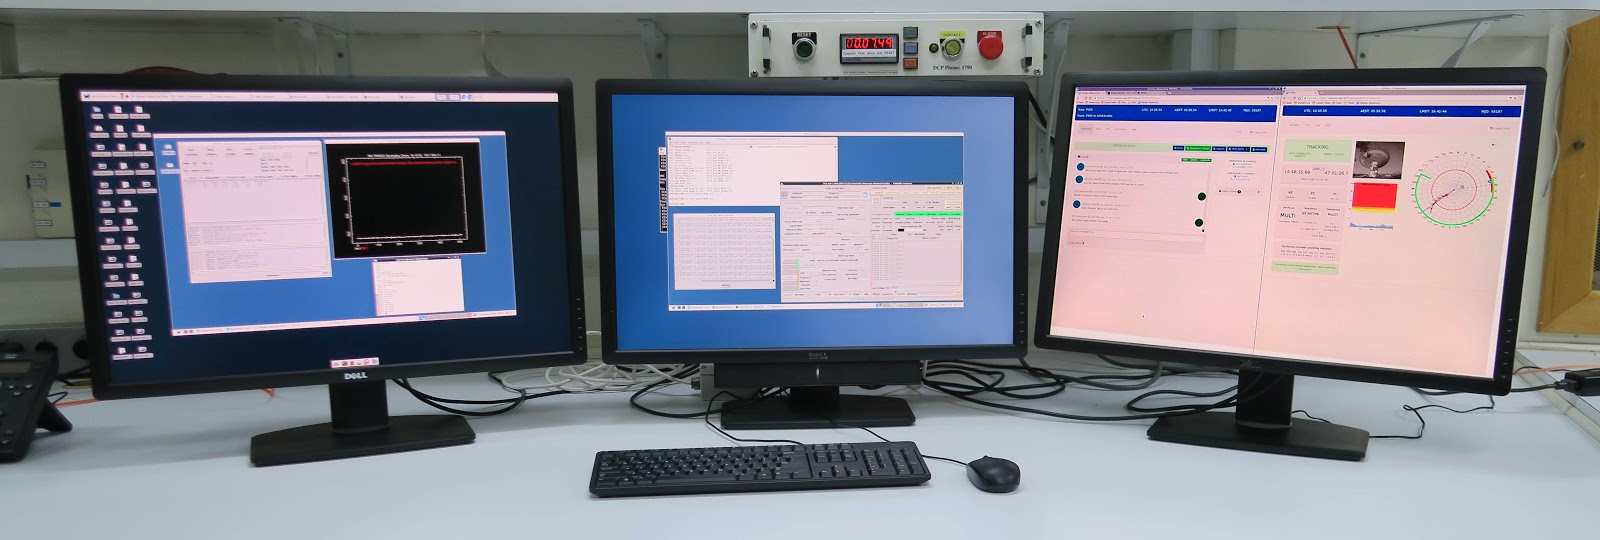 A typical setup for remote observing. L-R: Screen 1 with VNC2 running the correlator software; Screen 2 with VNC1 running the primary observing software; Screen 3 with the PORTAL and FROG. NOTE: This three screen setup is not essential, but it does allow for easy visual monitoring of the observation. Also to note for UWL observations, the first screen would be replaced with an additional web browser window containing Dhagu? and the second would show the VNC1 desktop but with the UWL GUI for LNA control and OPERFCC for receiver translation.